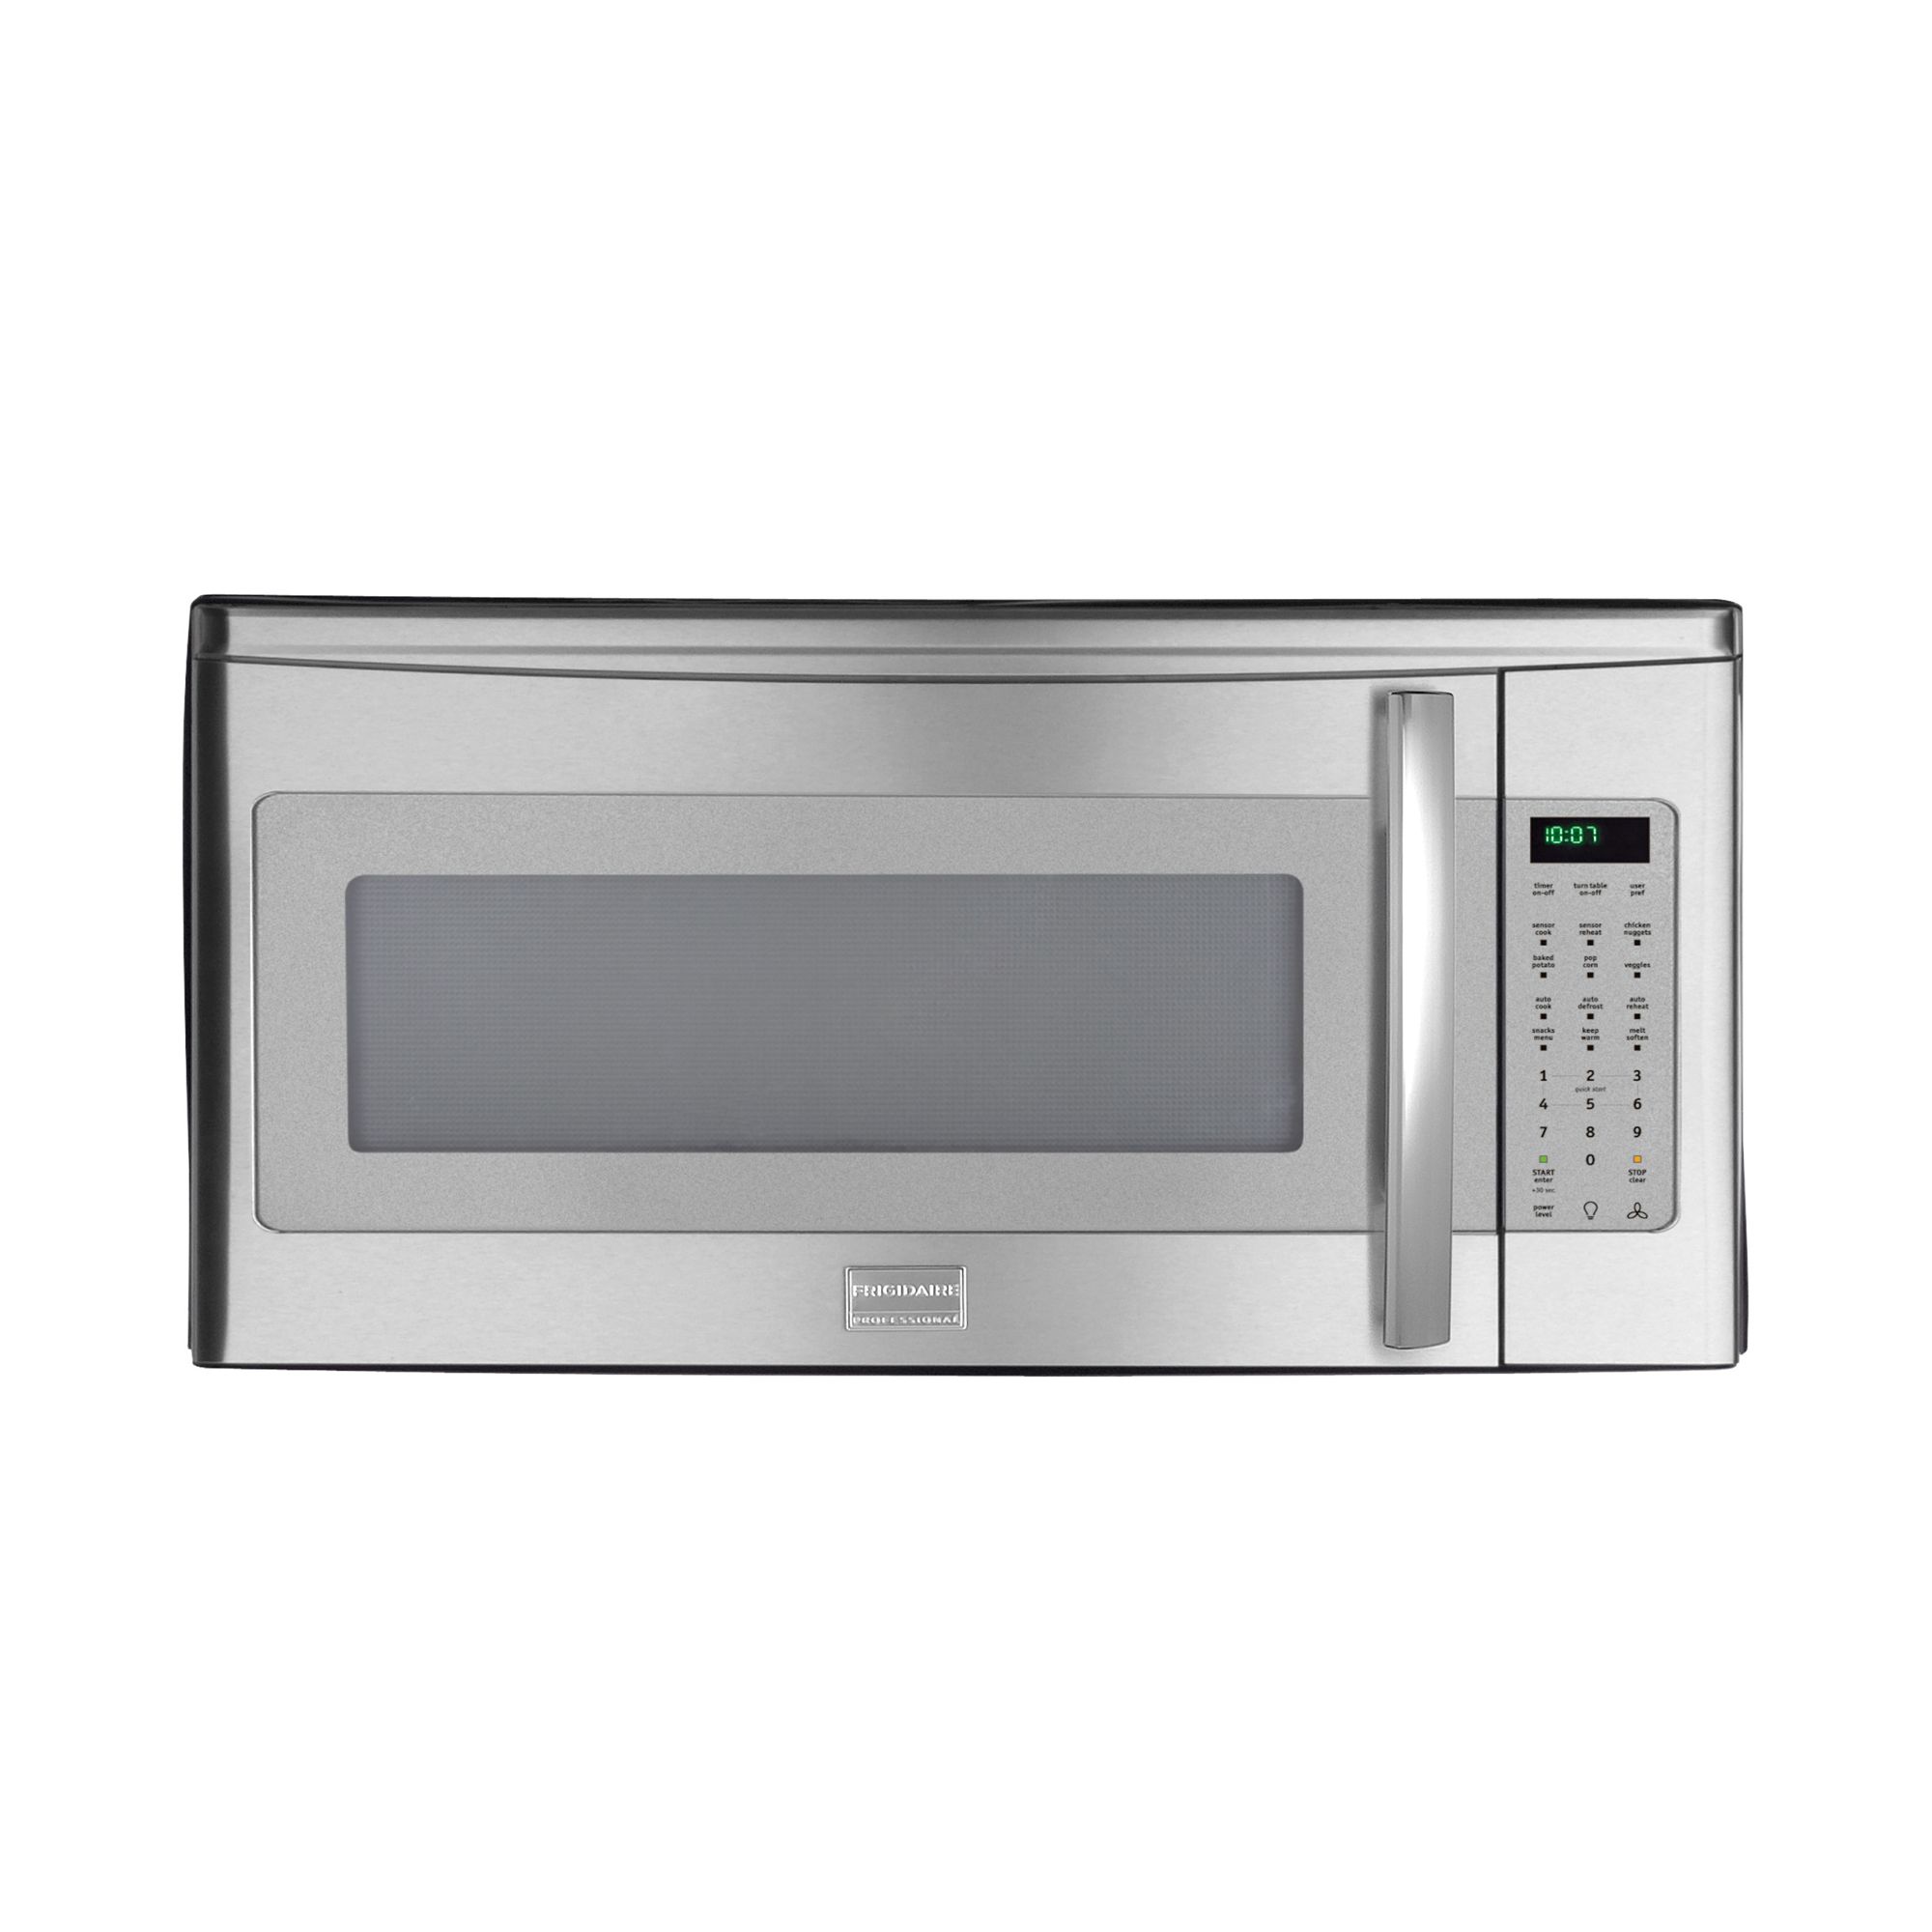 Frigidaire Professional Series 30 1.8 cu. ft. Microhood Combination Microwave Oven Stainless Steel (FPMV189K)